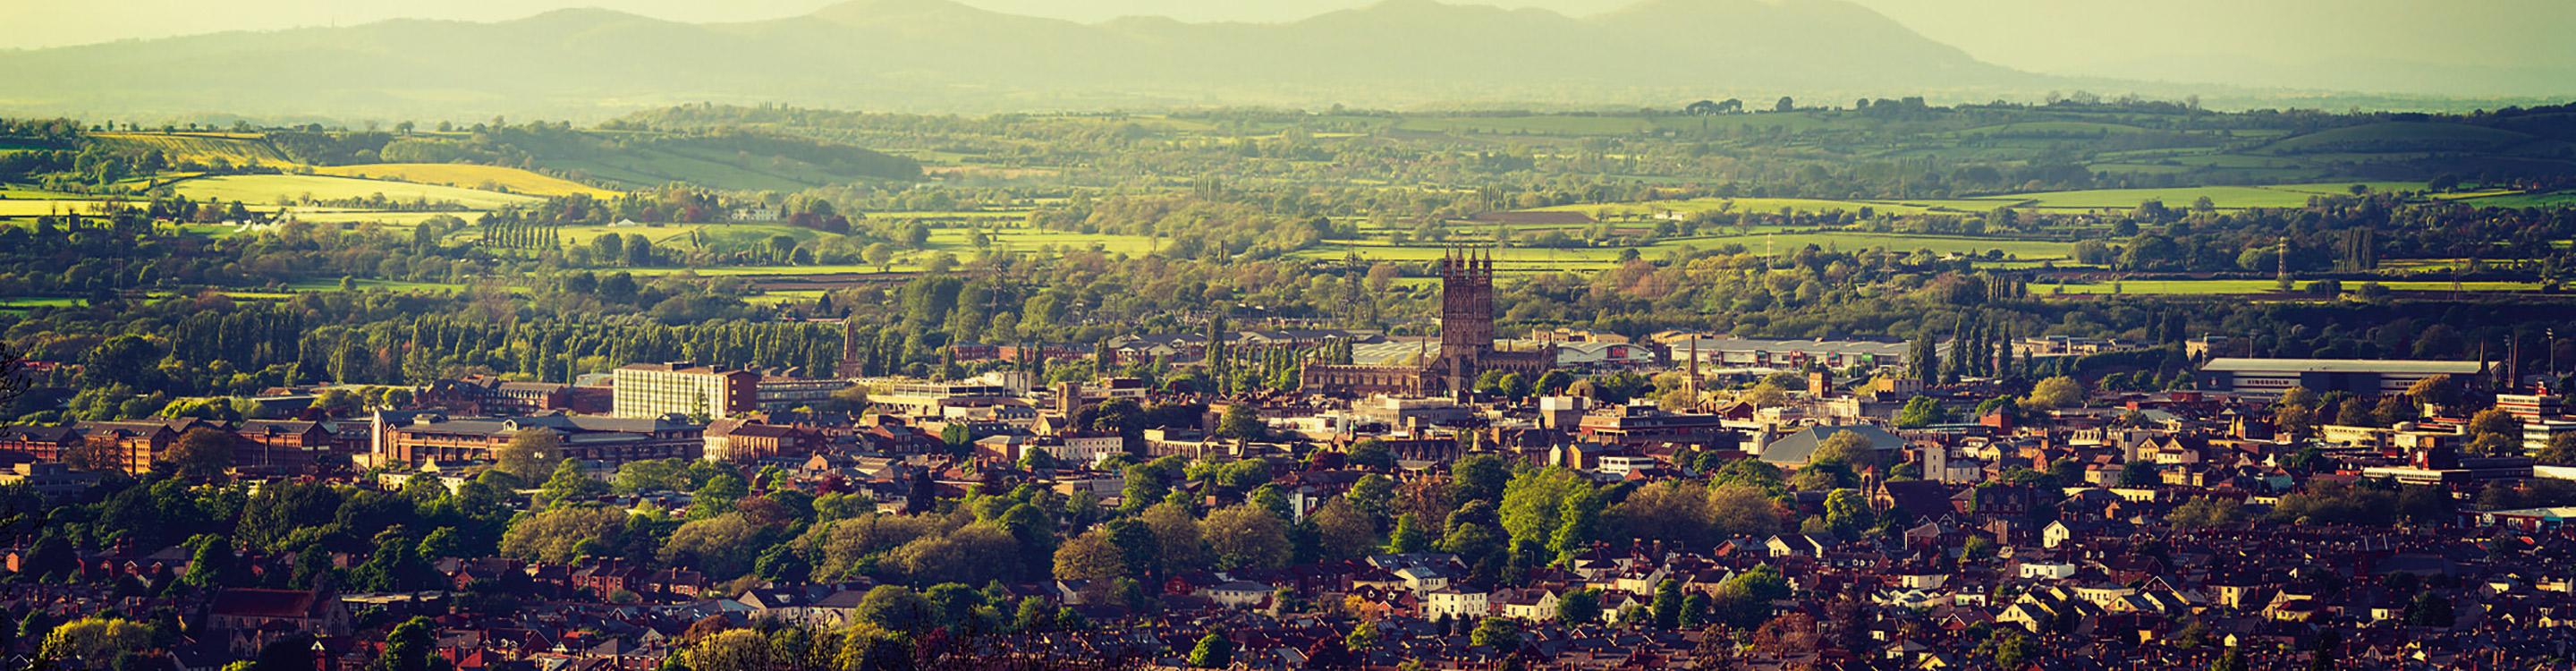 Aerial view of Gloucester